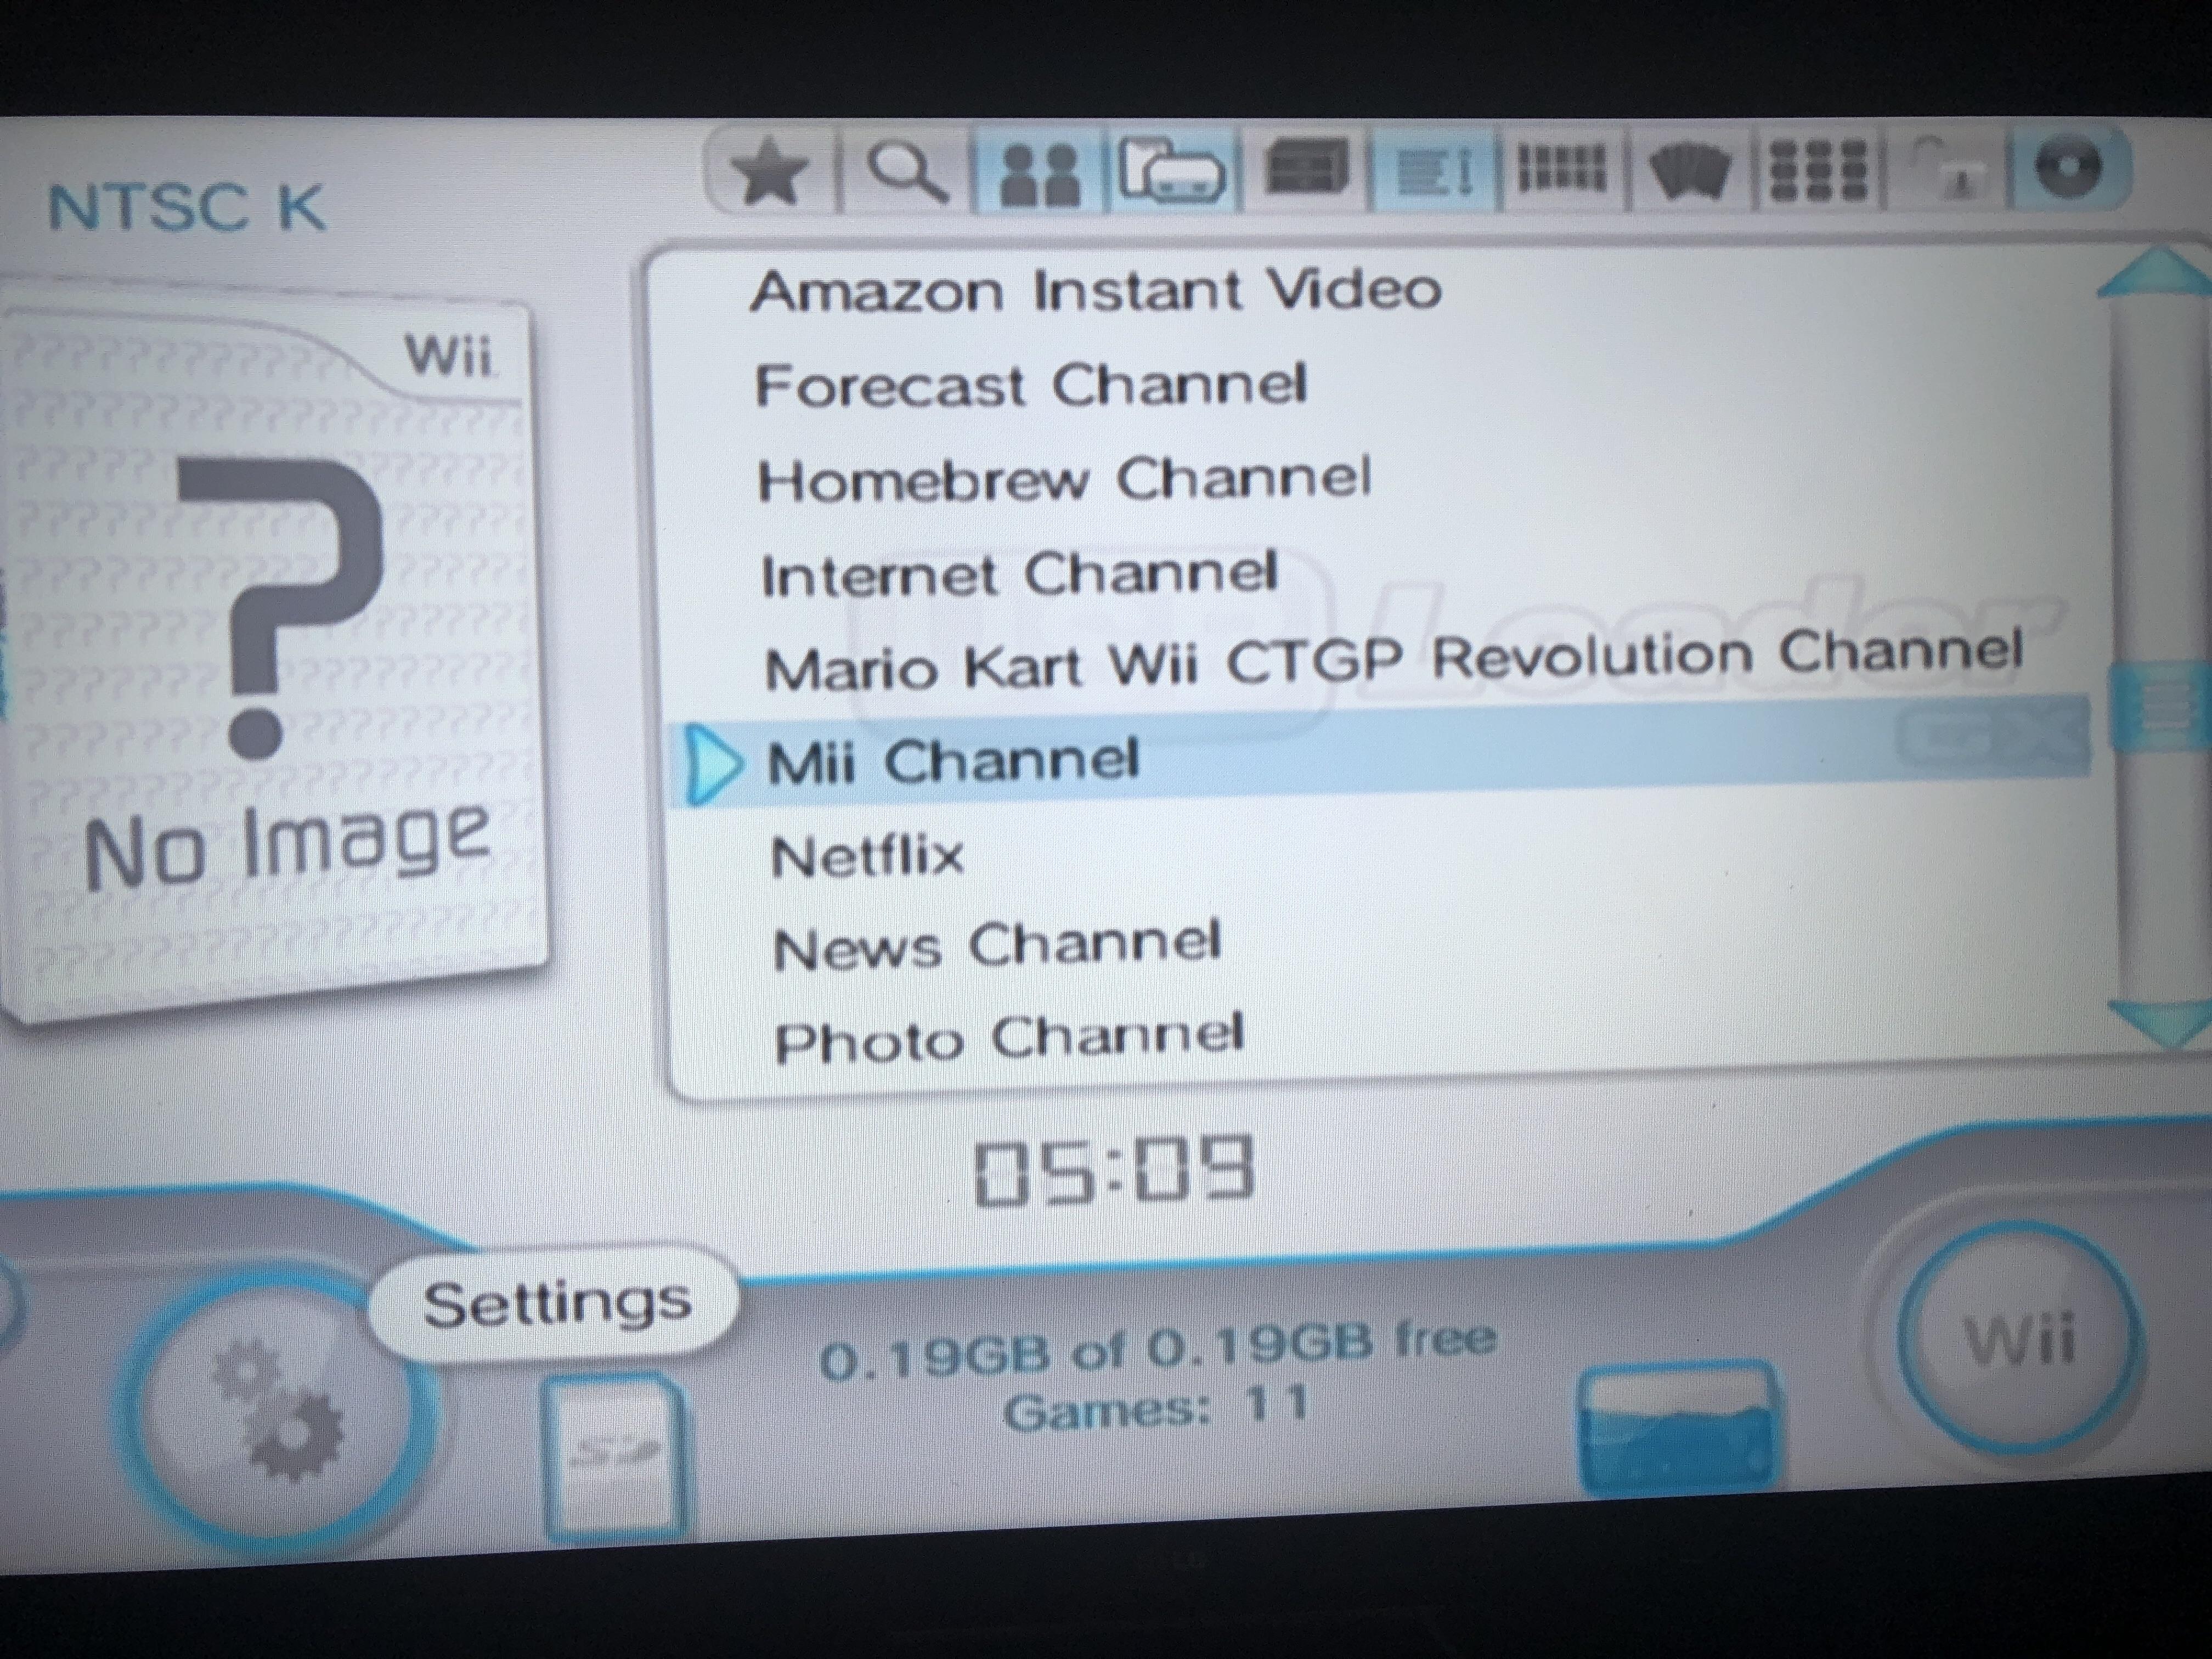 how to put wii games on usb for usb loader gx mac